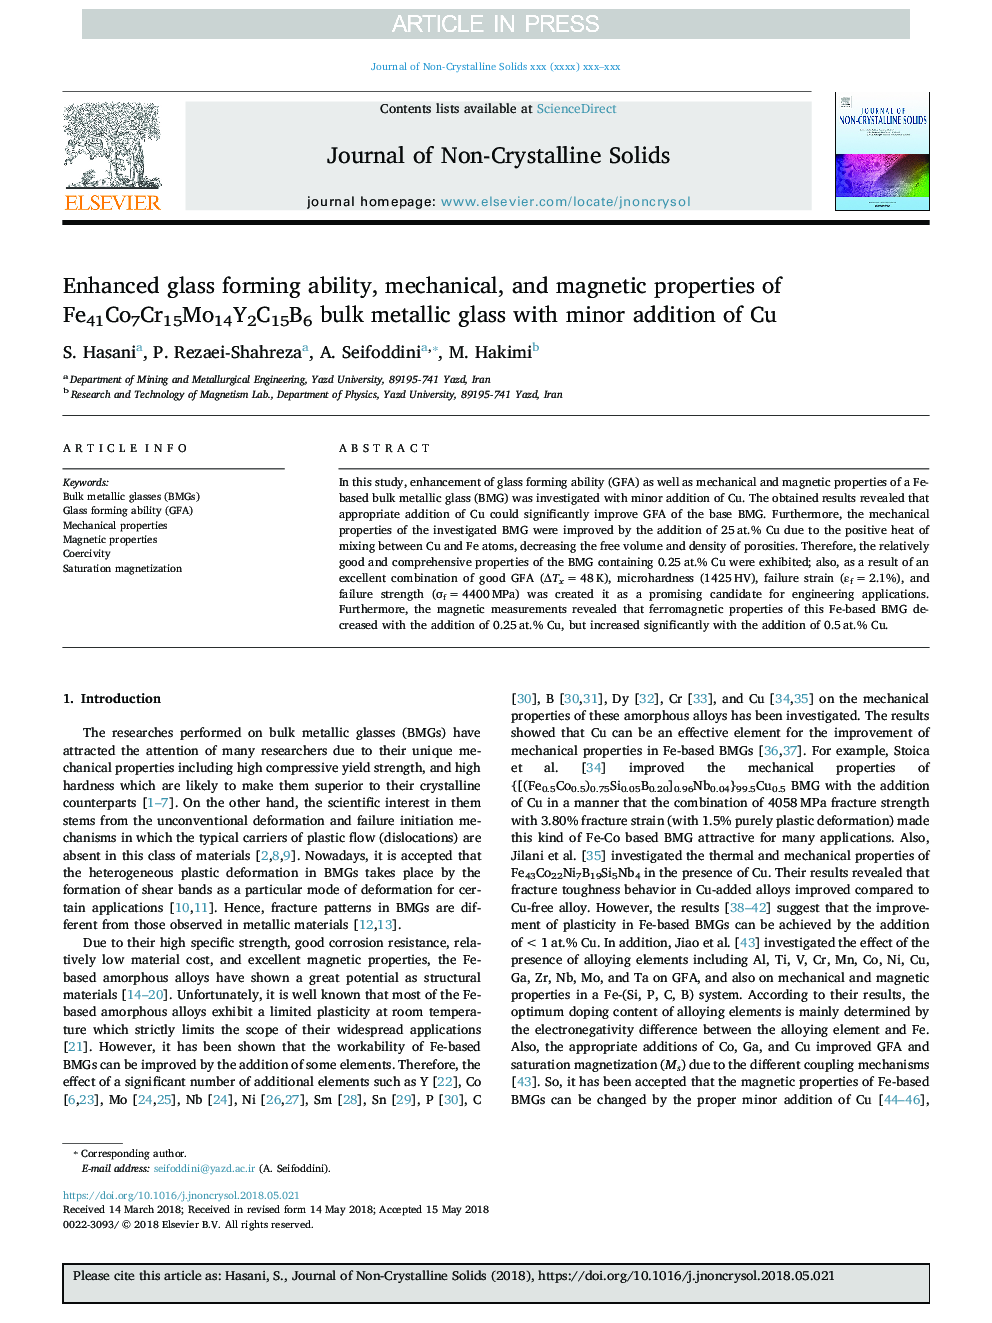 Enhanced glass forming ability, mechanical, and magnetic properties of Fe41Co7Cr15Mo14Y2C15B6 bulk metallic glass with minor addition of Cu